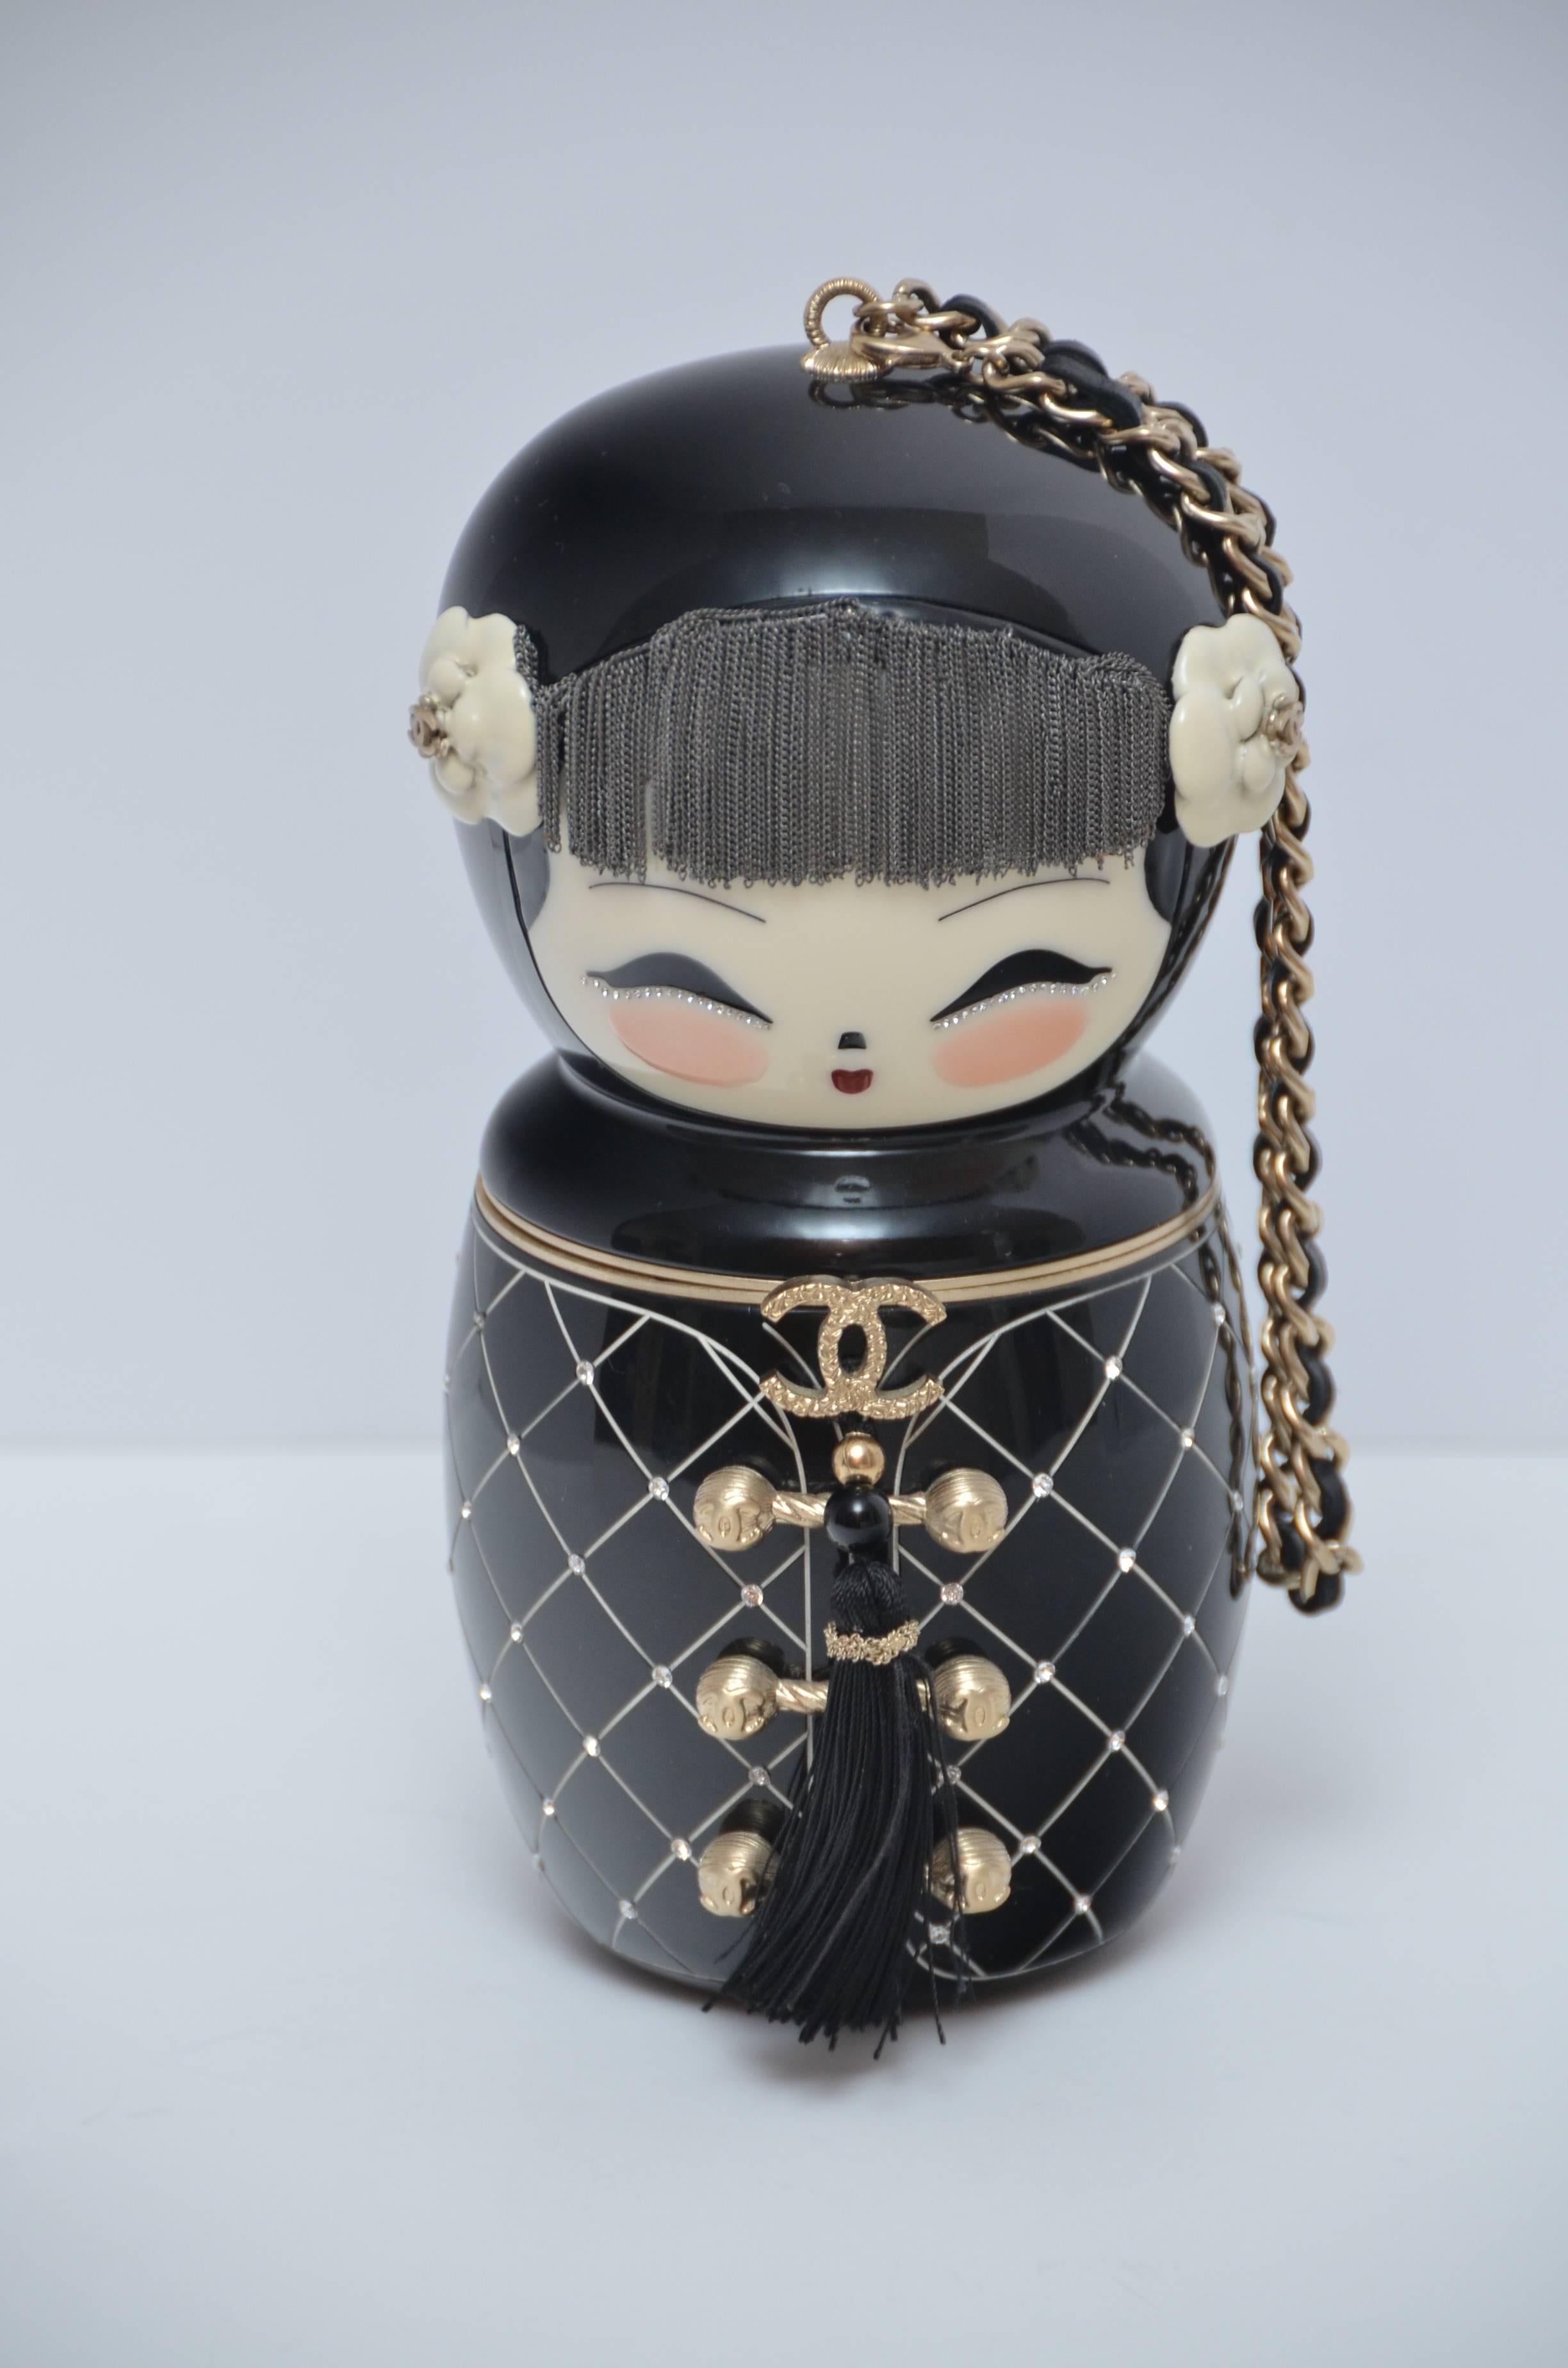 Chanel  PARIS-SHANGHAI  Doll Clutch. 
This special bag was  part of Karl Lagerfeld’s handbag collection that was Shanghai oriented. 
His collection shows great Parisian skill making all of them a true French luxury. 
This bag took its inspiration